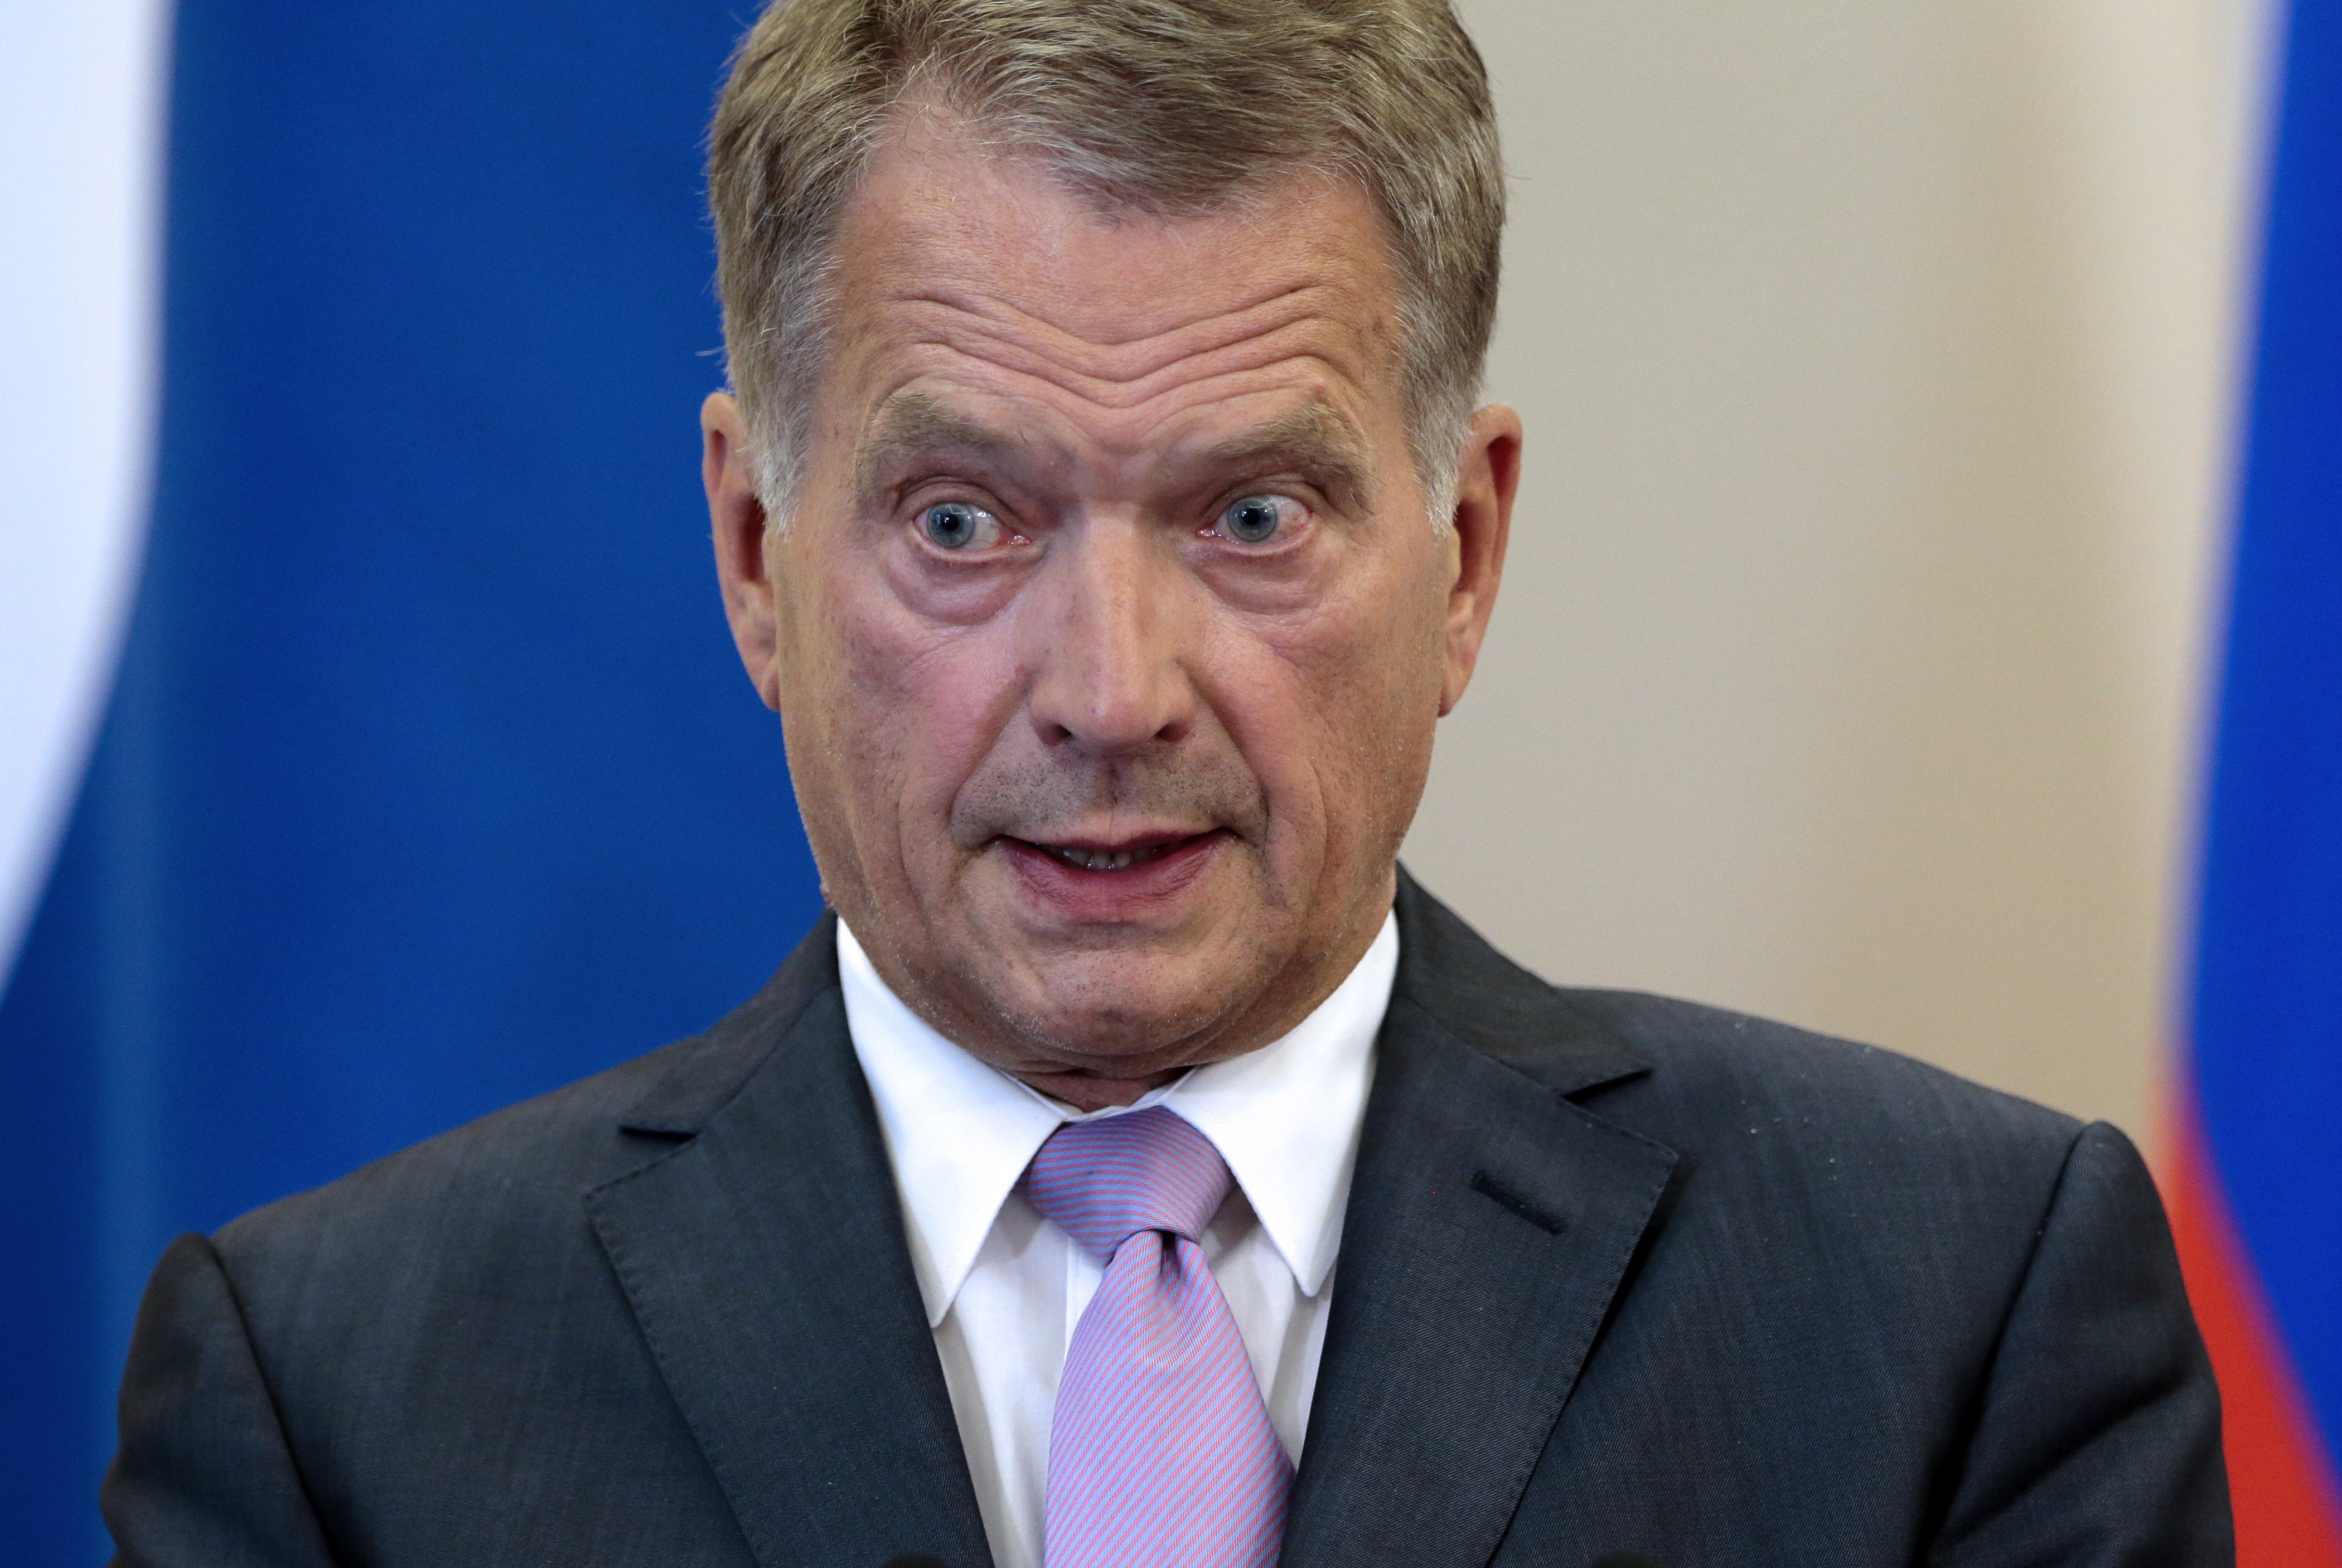 Finnish President Sauli Niinistö at a press conference in Russia in August 2014. Niinistö addressed the UN Climate Summit in New York this week.  (Ivan Sekretarev /AFP/Getty Images)